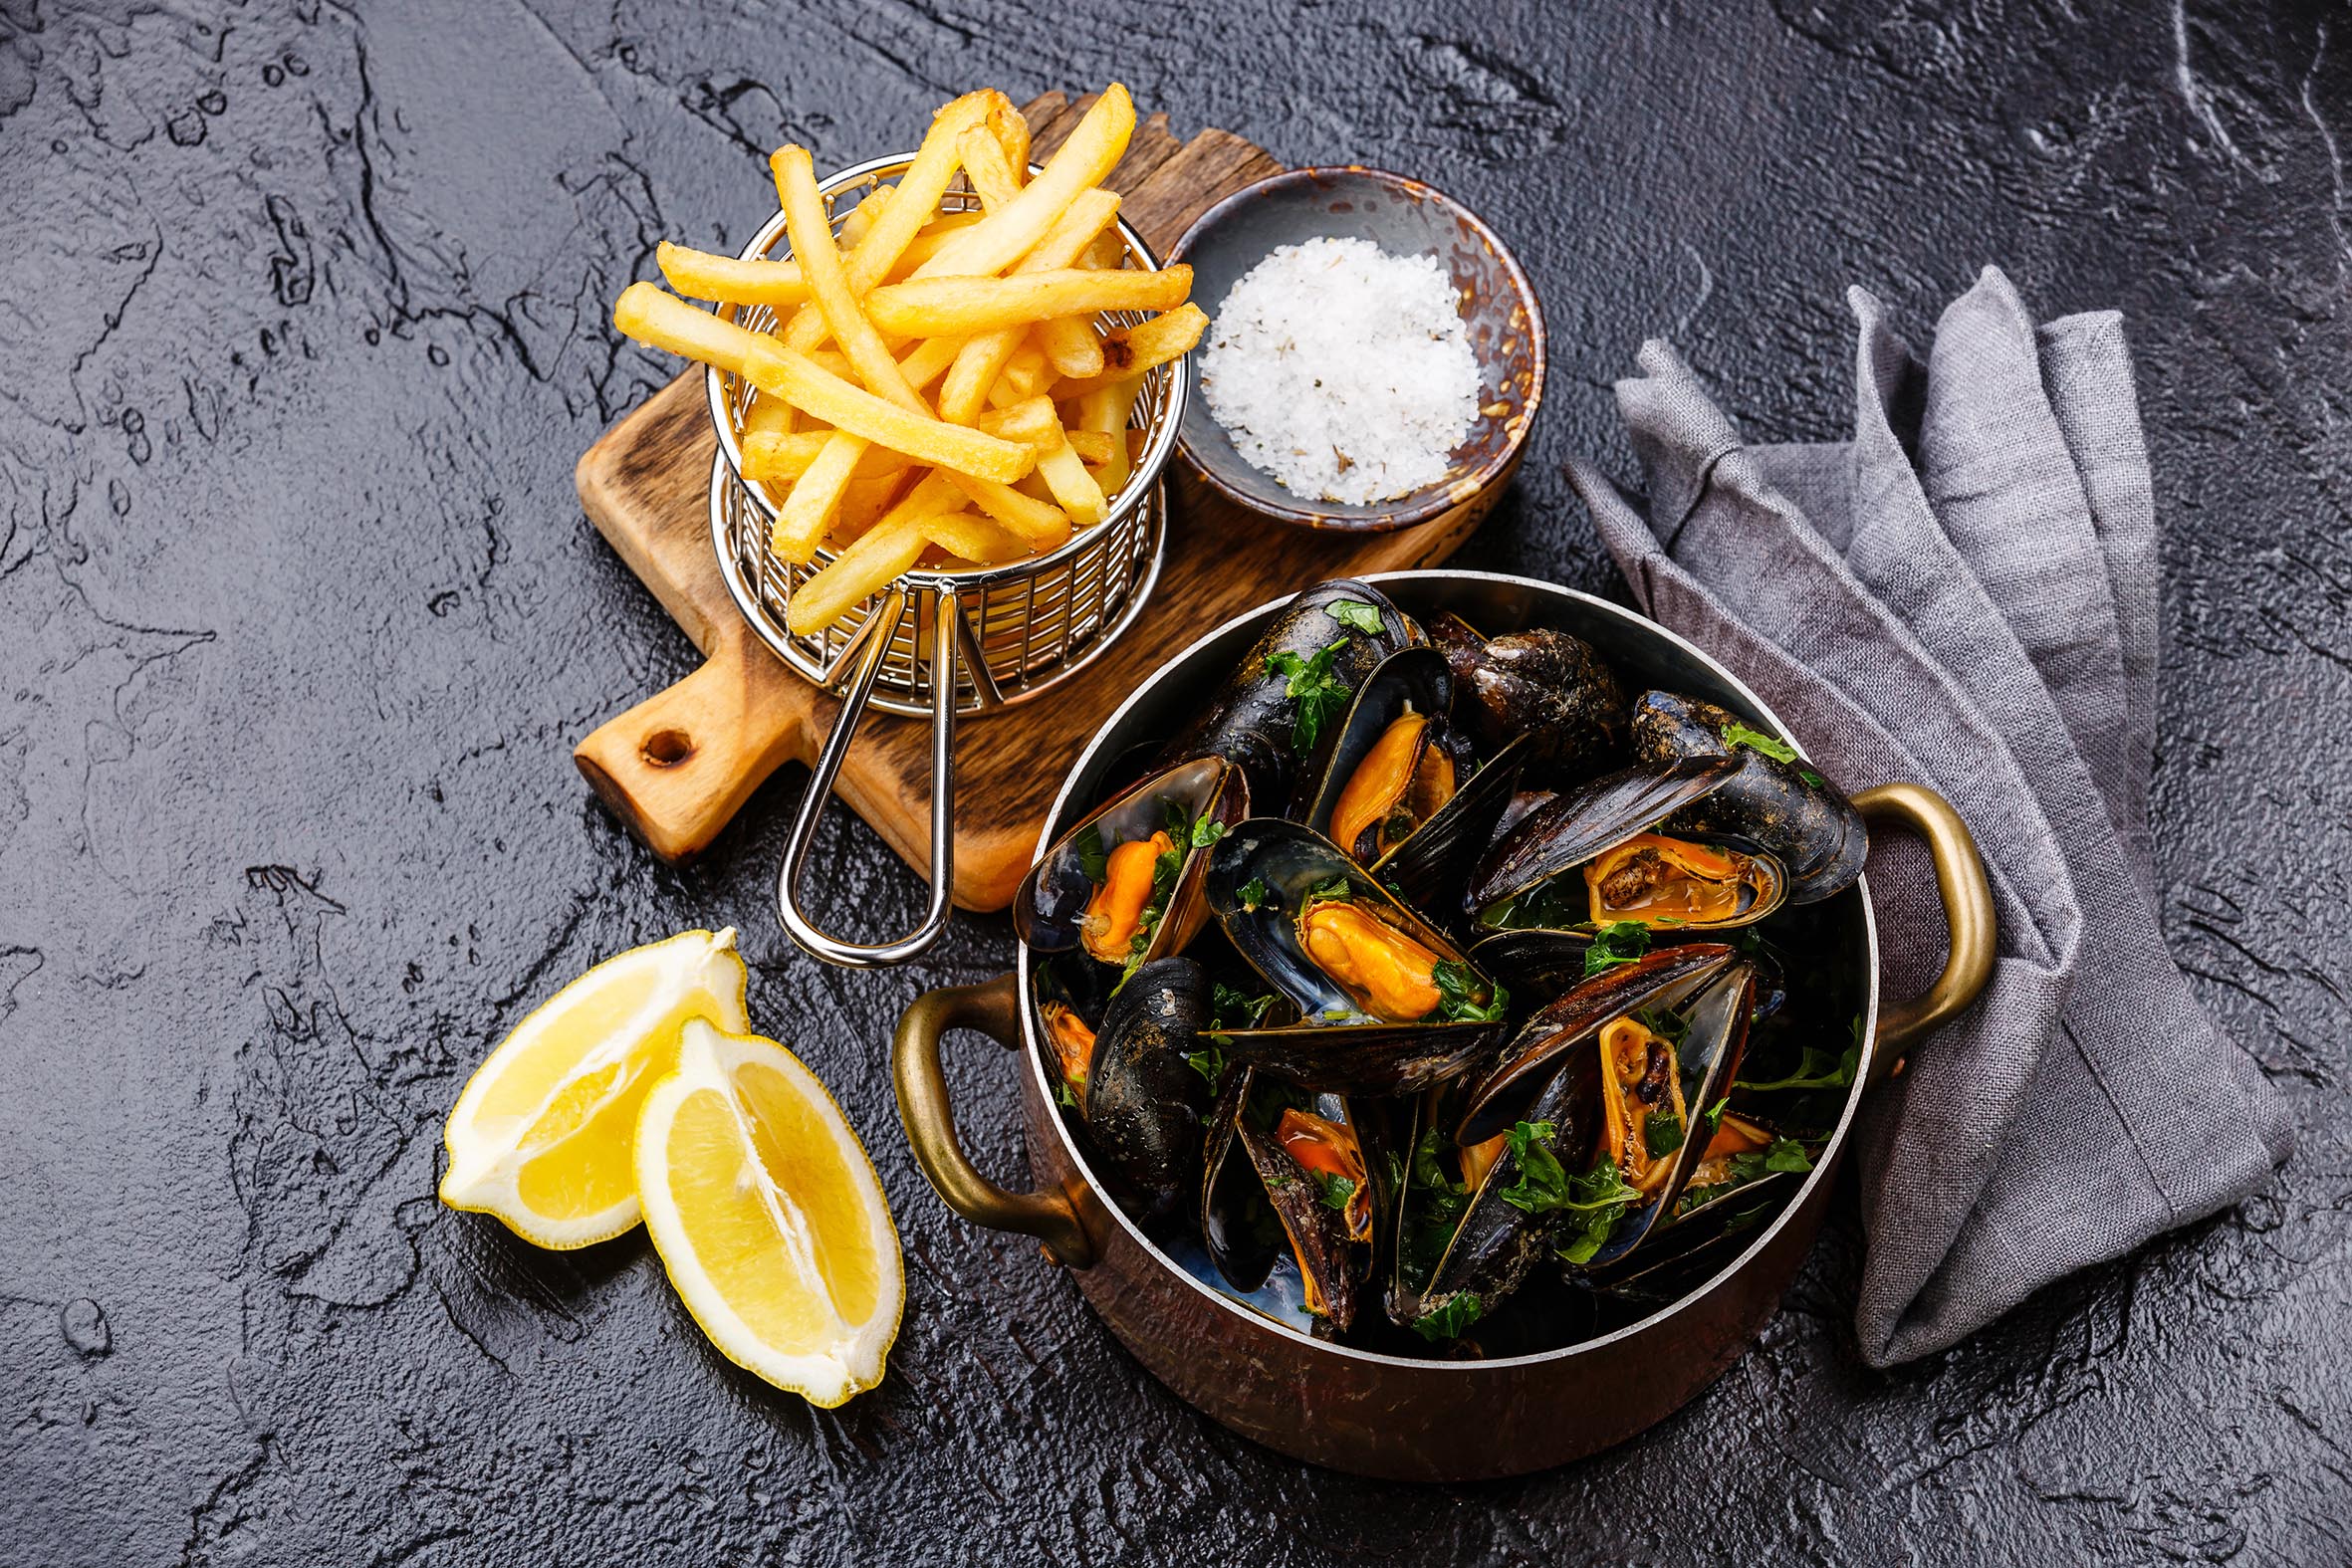 Mussels and Fries Evening – 19 p.m.